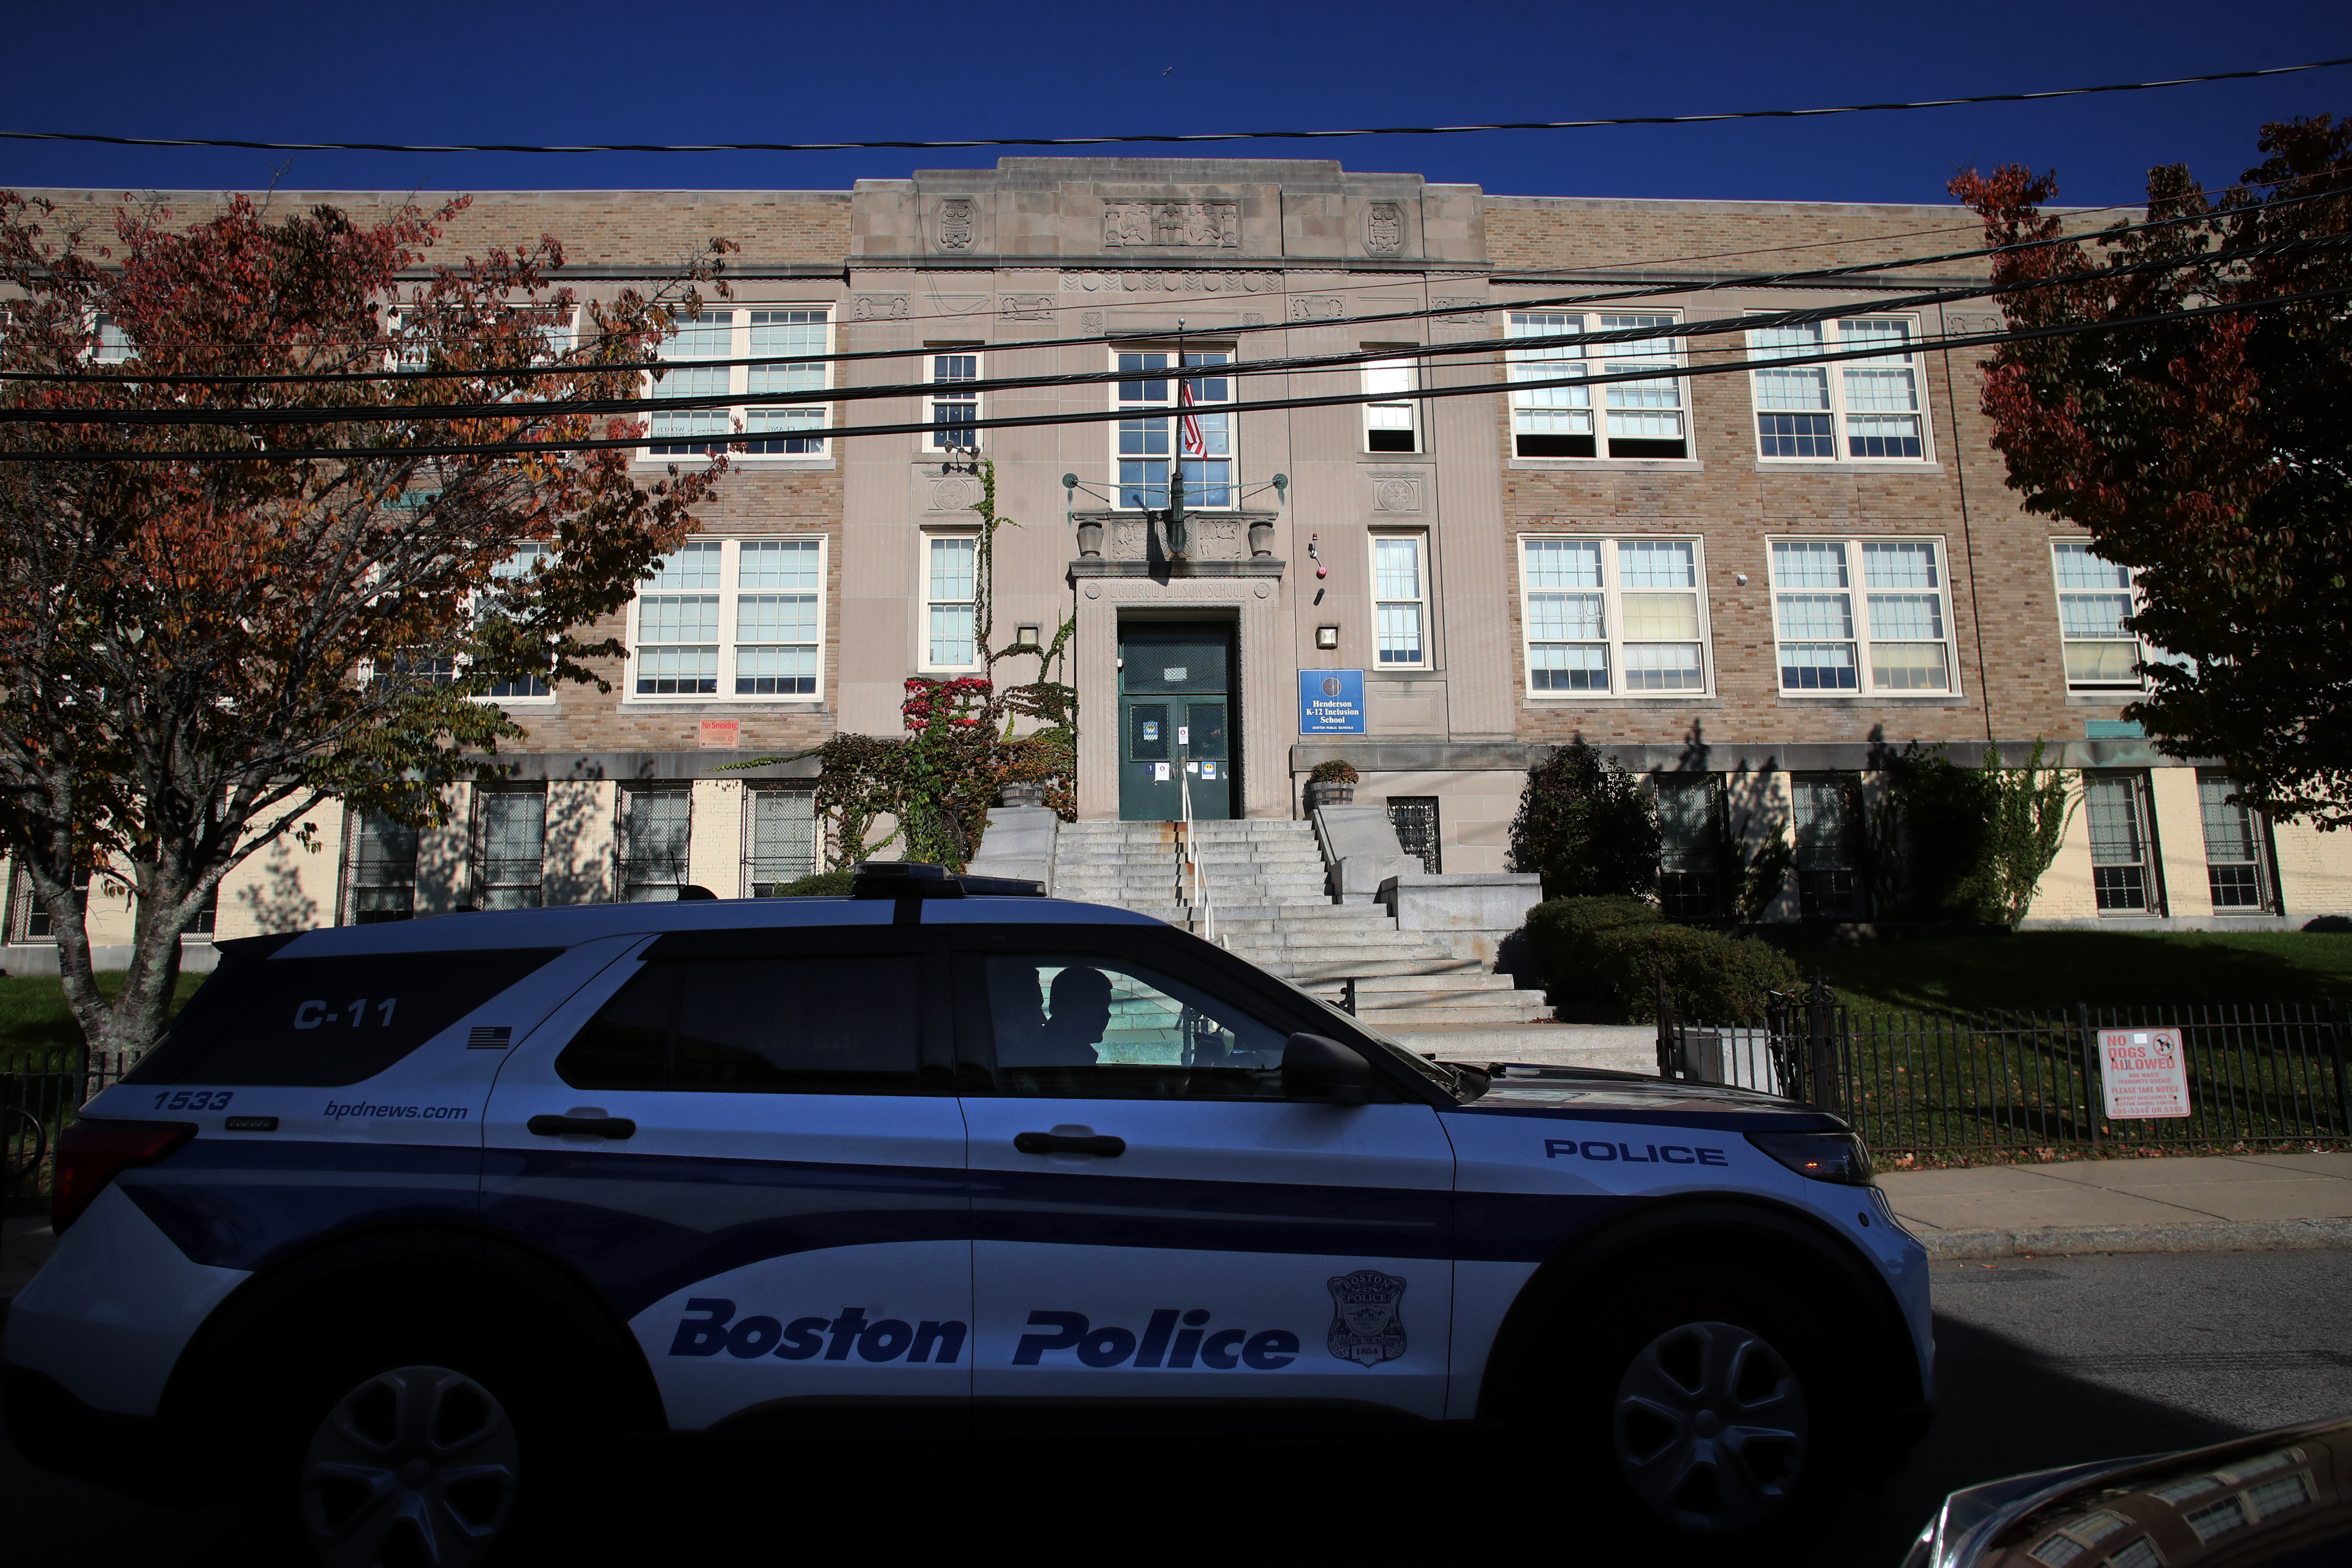 Incident involving cheer coaches at Mass. school under police investigation